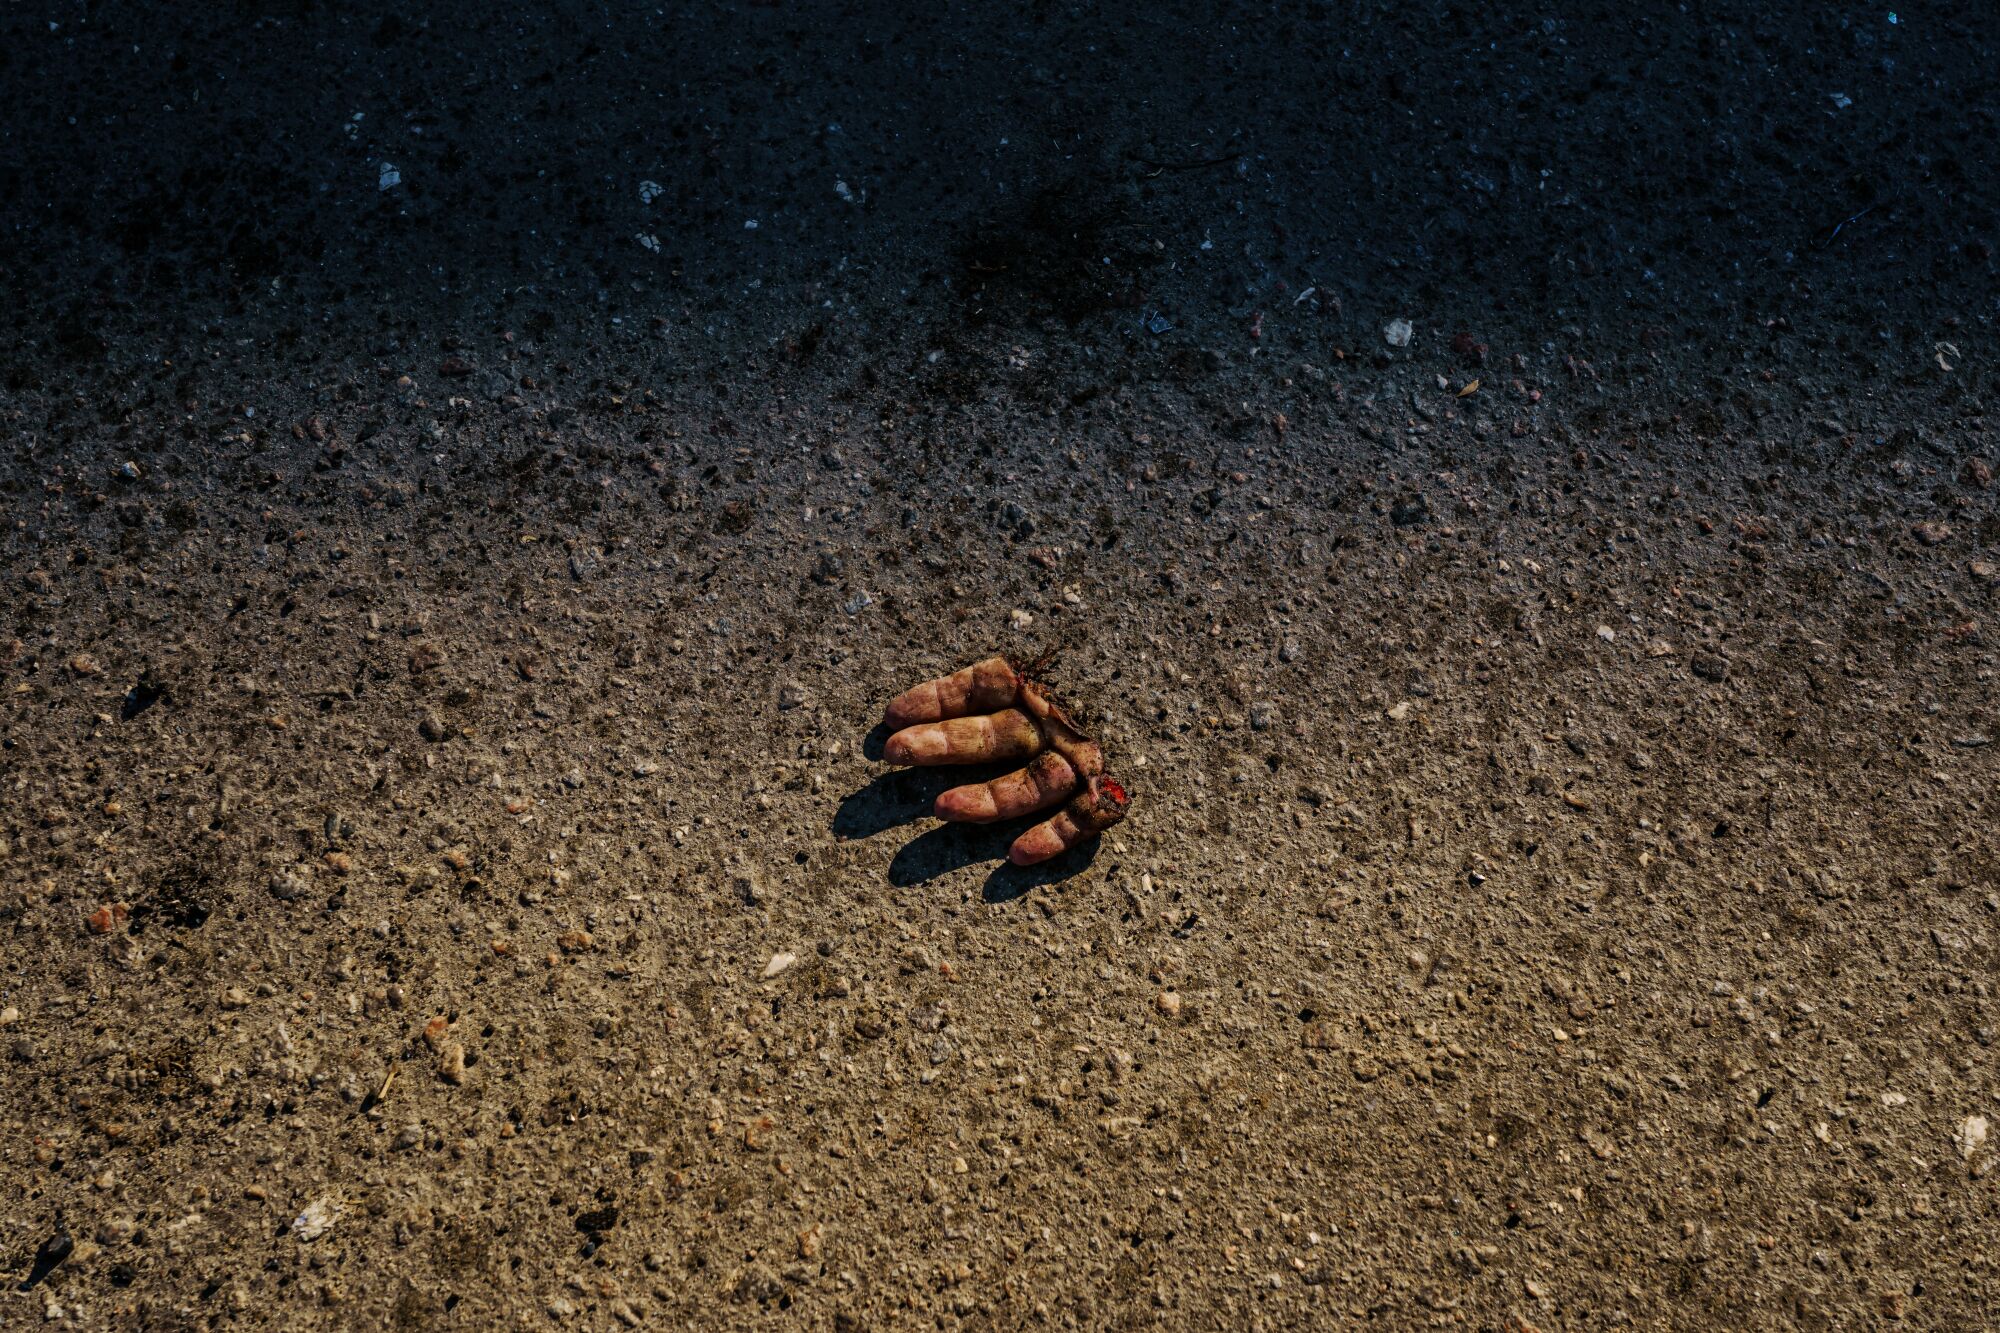 A hand severed at the knuckles sits on the pavement